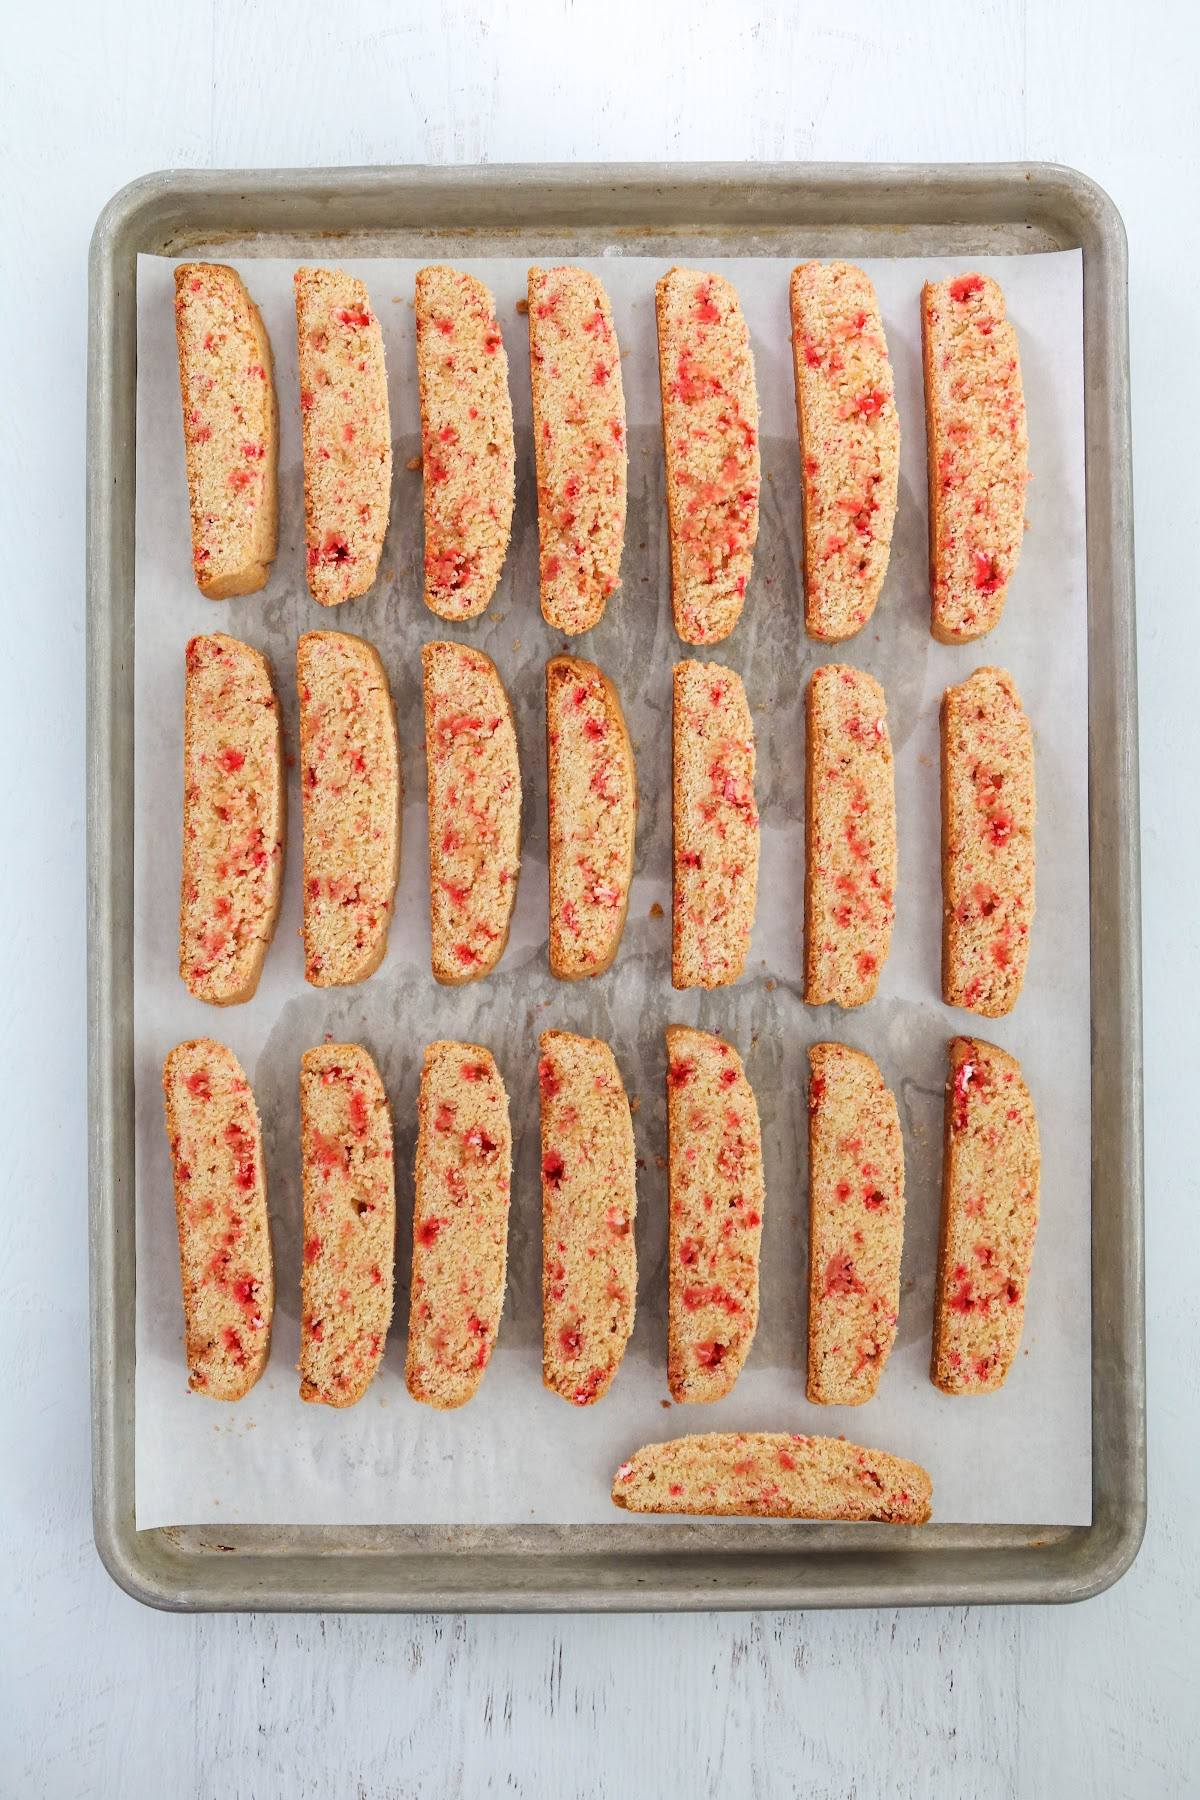 https://www.pookspantry.com/wp-content/uploads/2022/11/biscotti-ready-for-the-second-bake-1.jpg